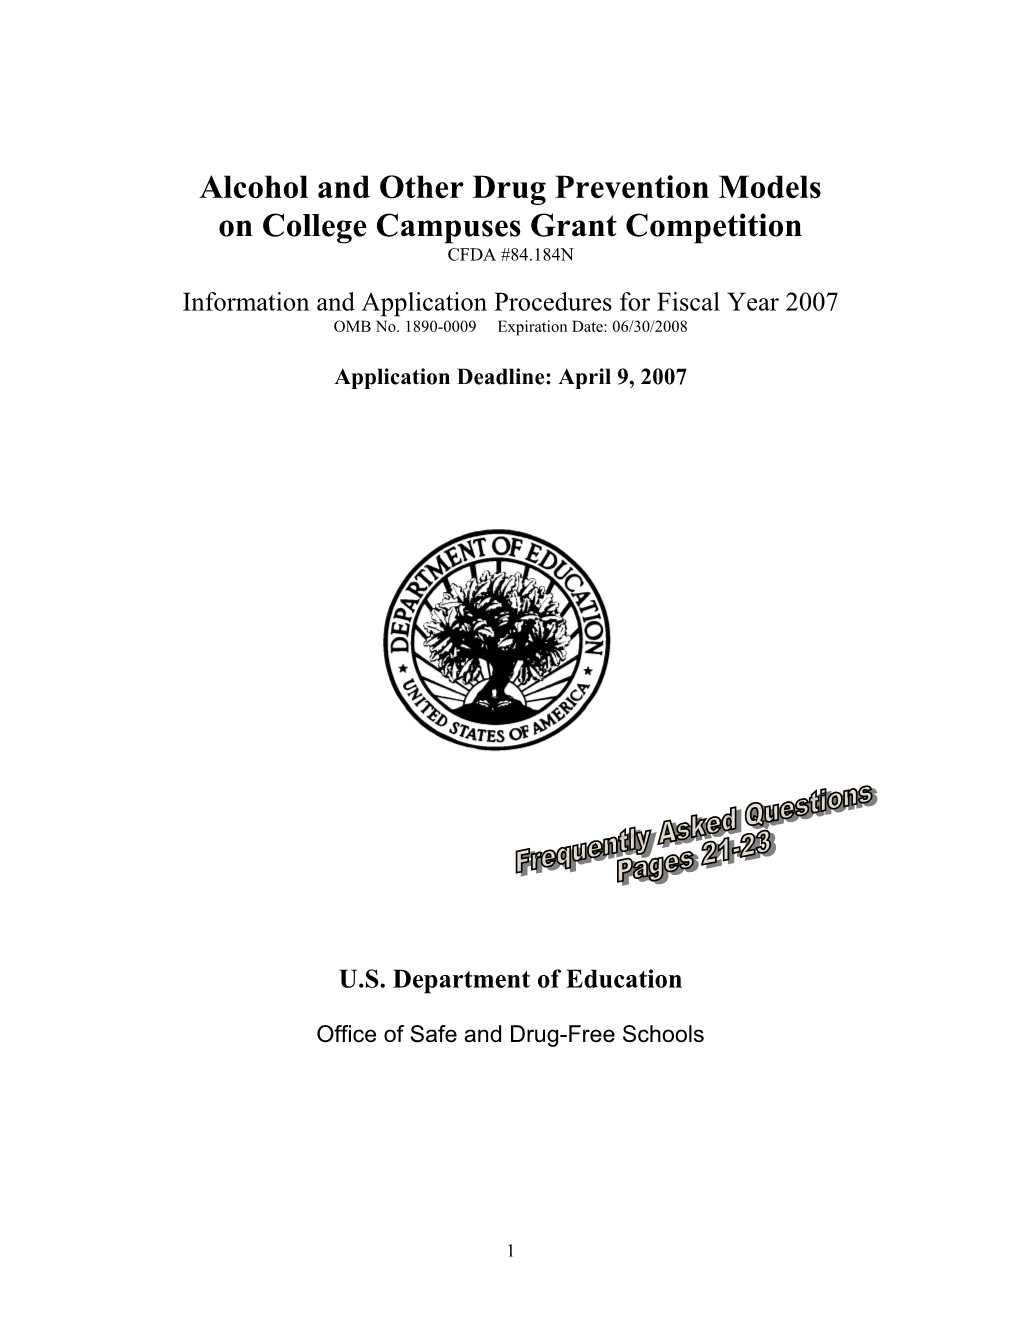 Alcohol and Other Drug Prevention Models on College Campuses Grant Competition